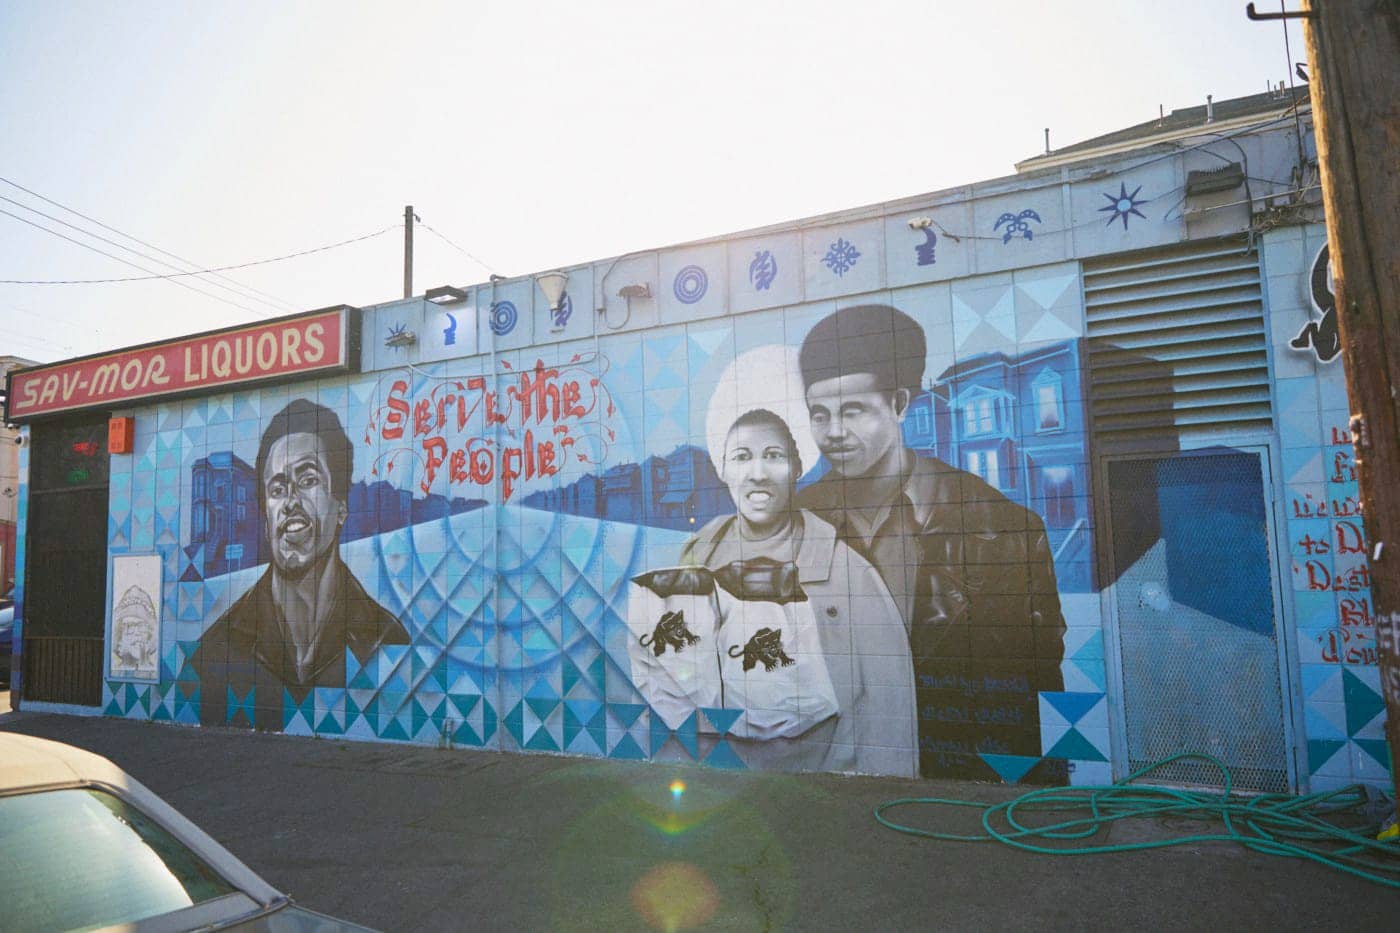 Serve-the-people-Black-Panther-mural-in-Oakland-by-Bryan-Berry, Fighting co-optation: Honoring the Black Panther Party on its 55th anniversary, Culture Currents 